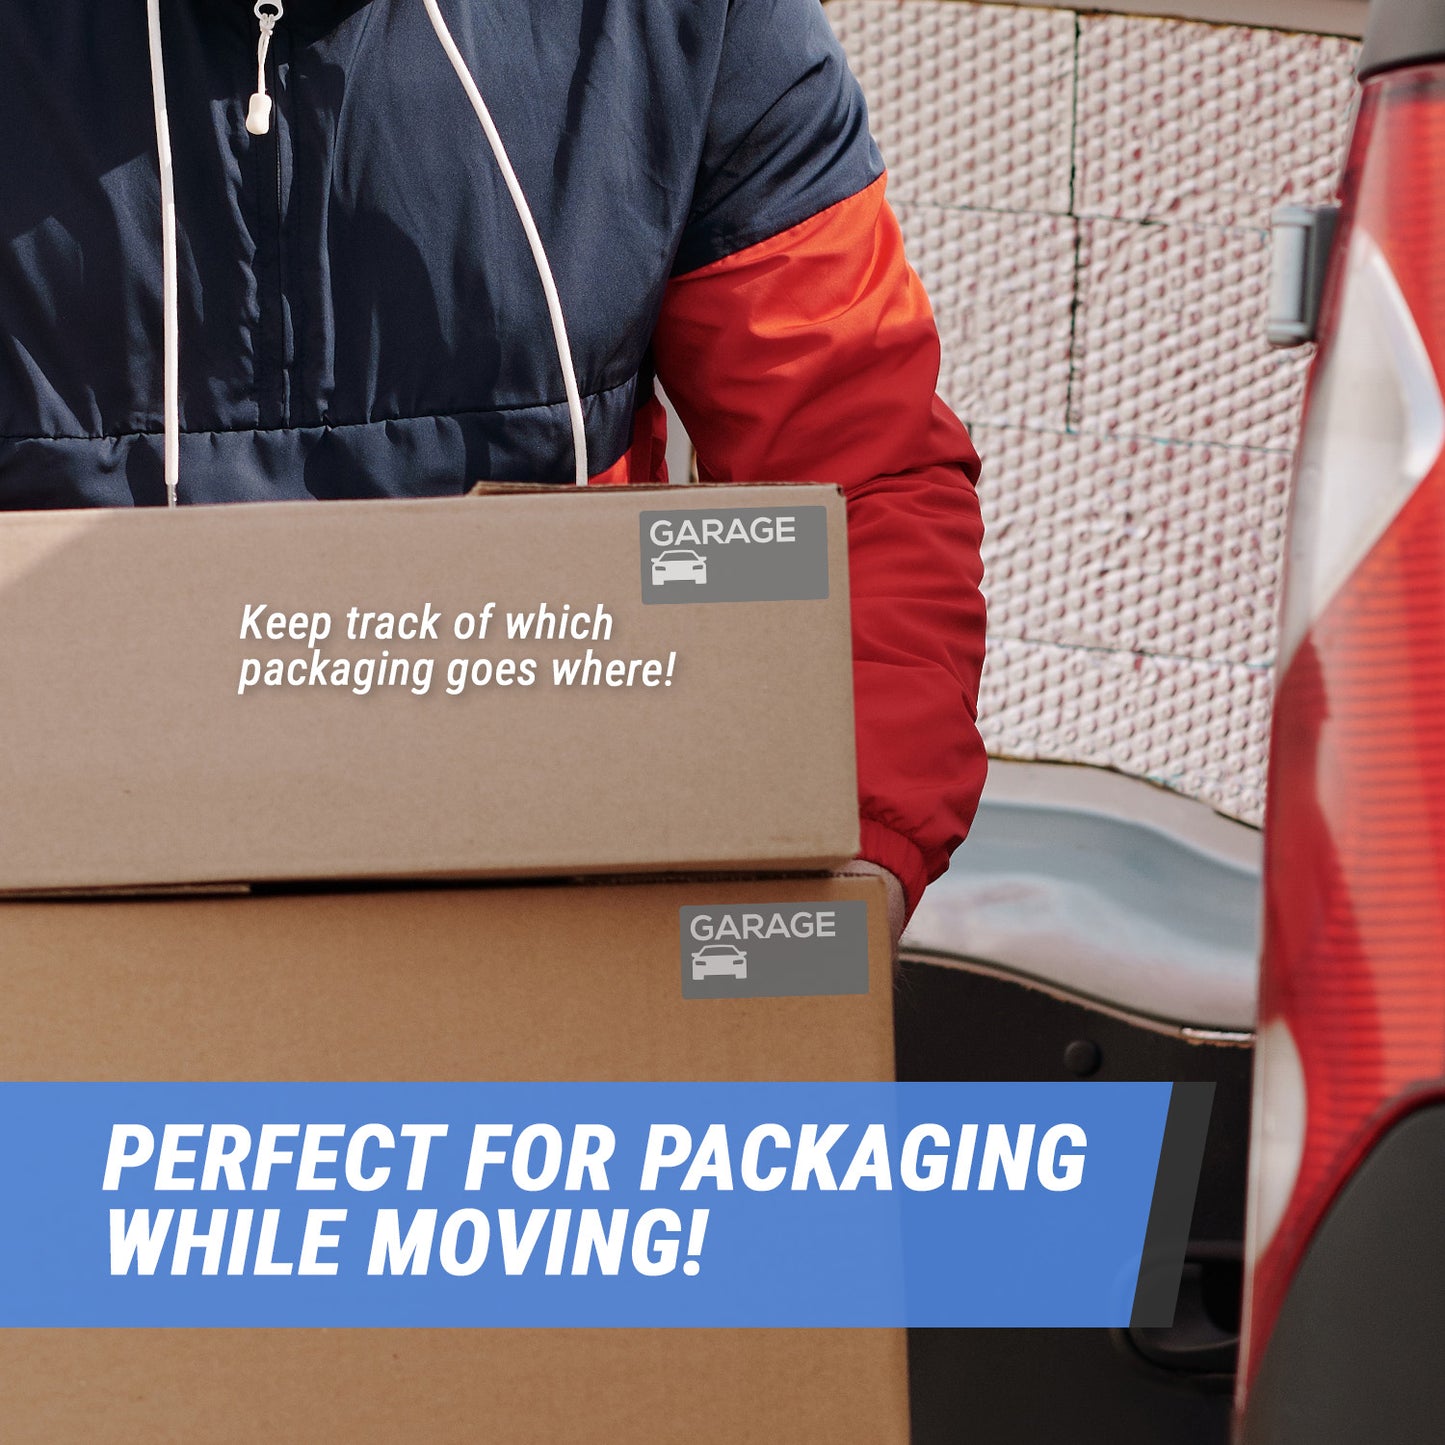 4 x 2 inch | Moving & Packing: Garage Stickers